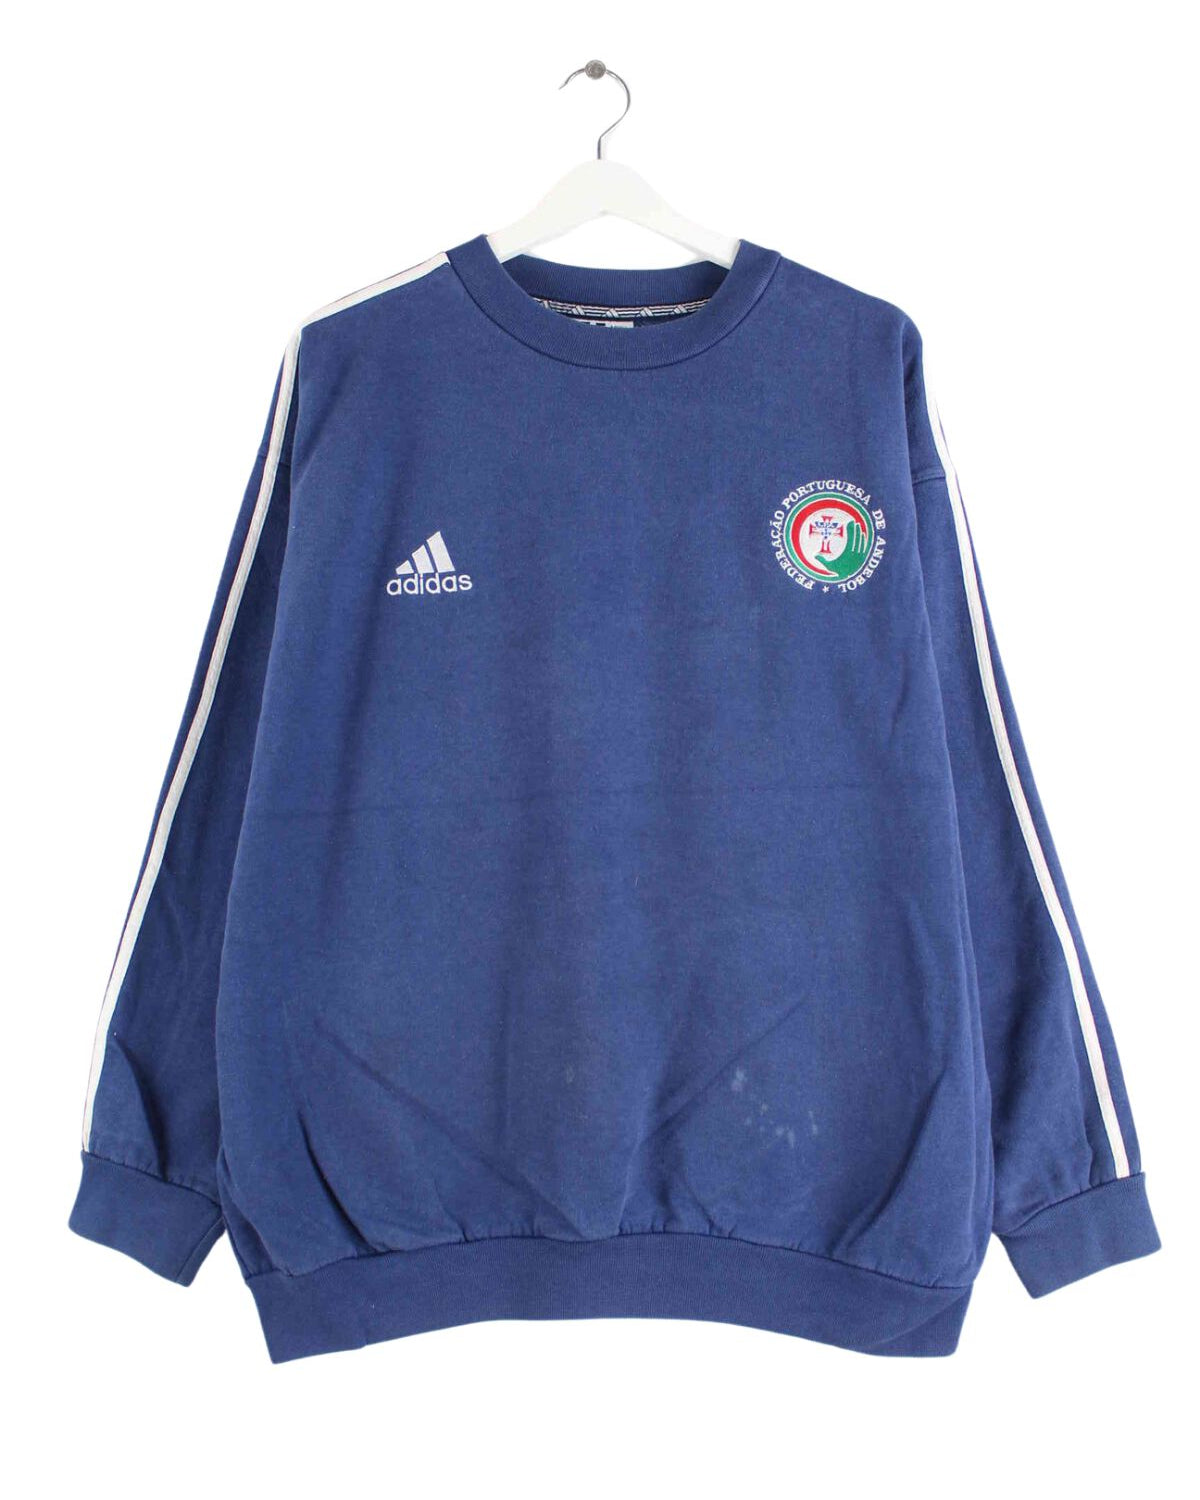 Adidas 80s Vintage Portugal Embroidered Sweater Blau XL (front image)